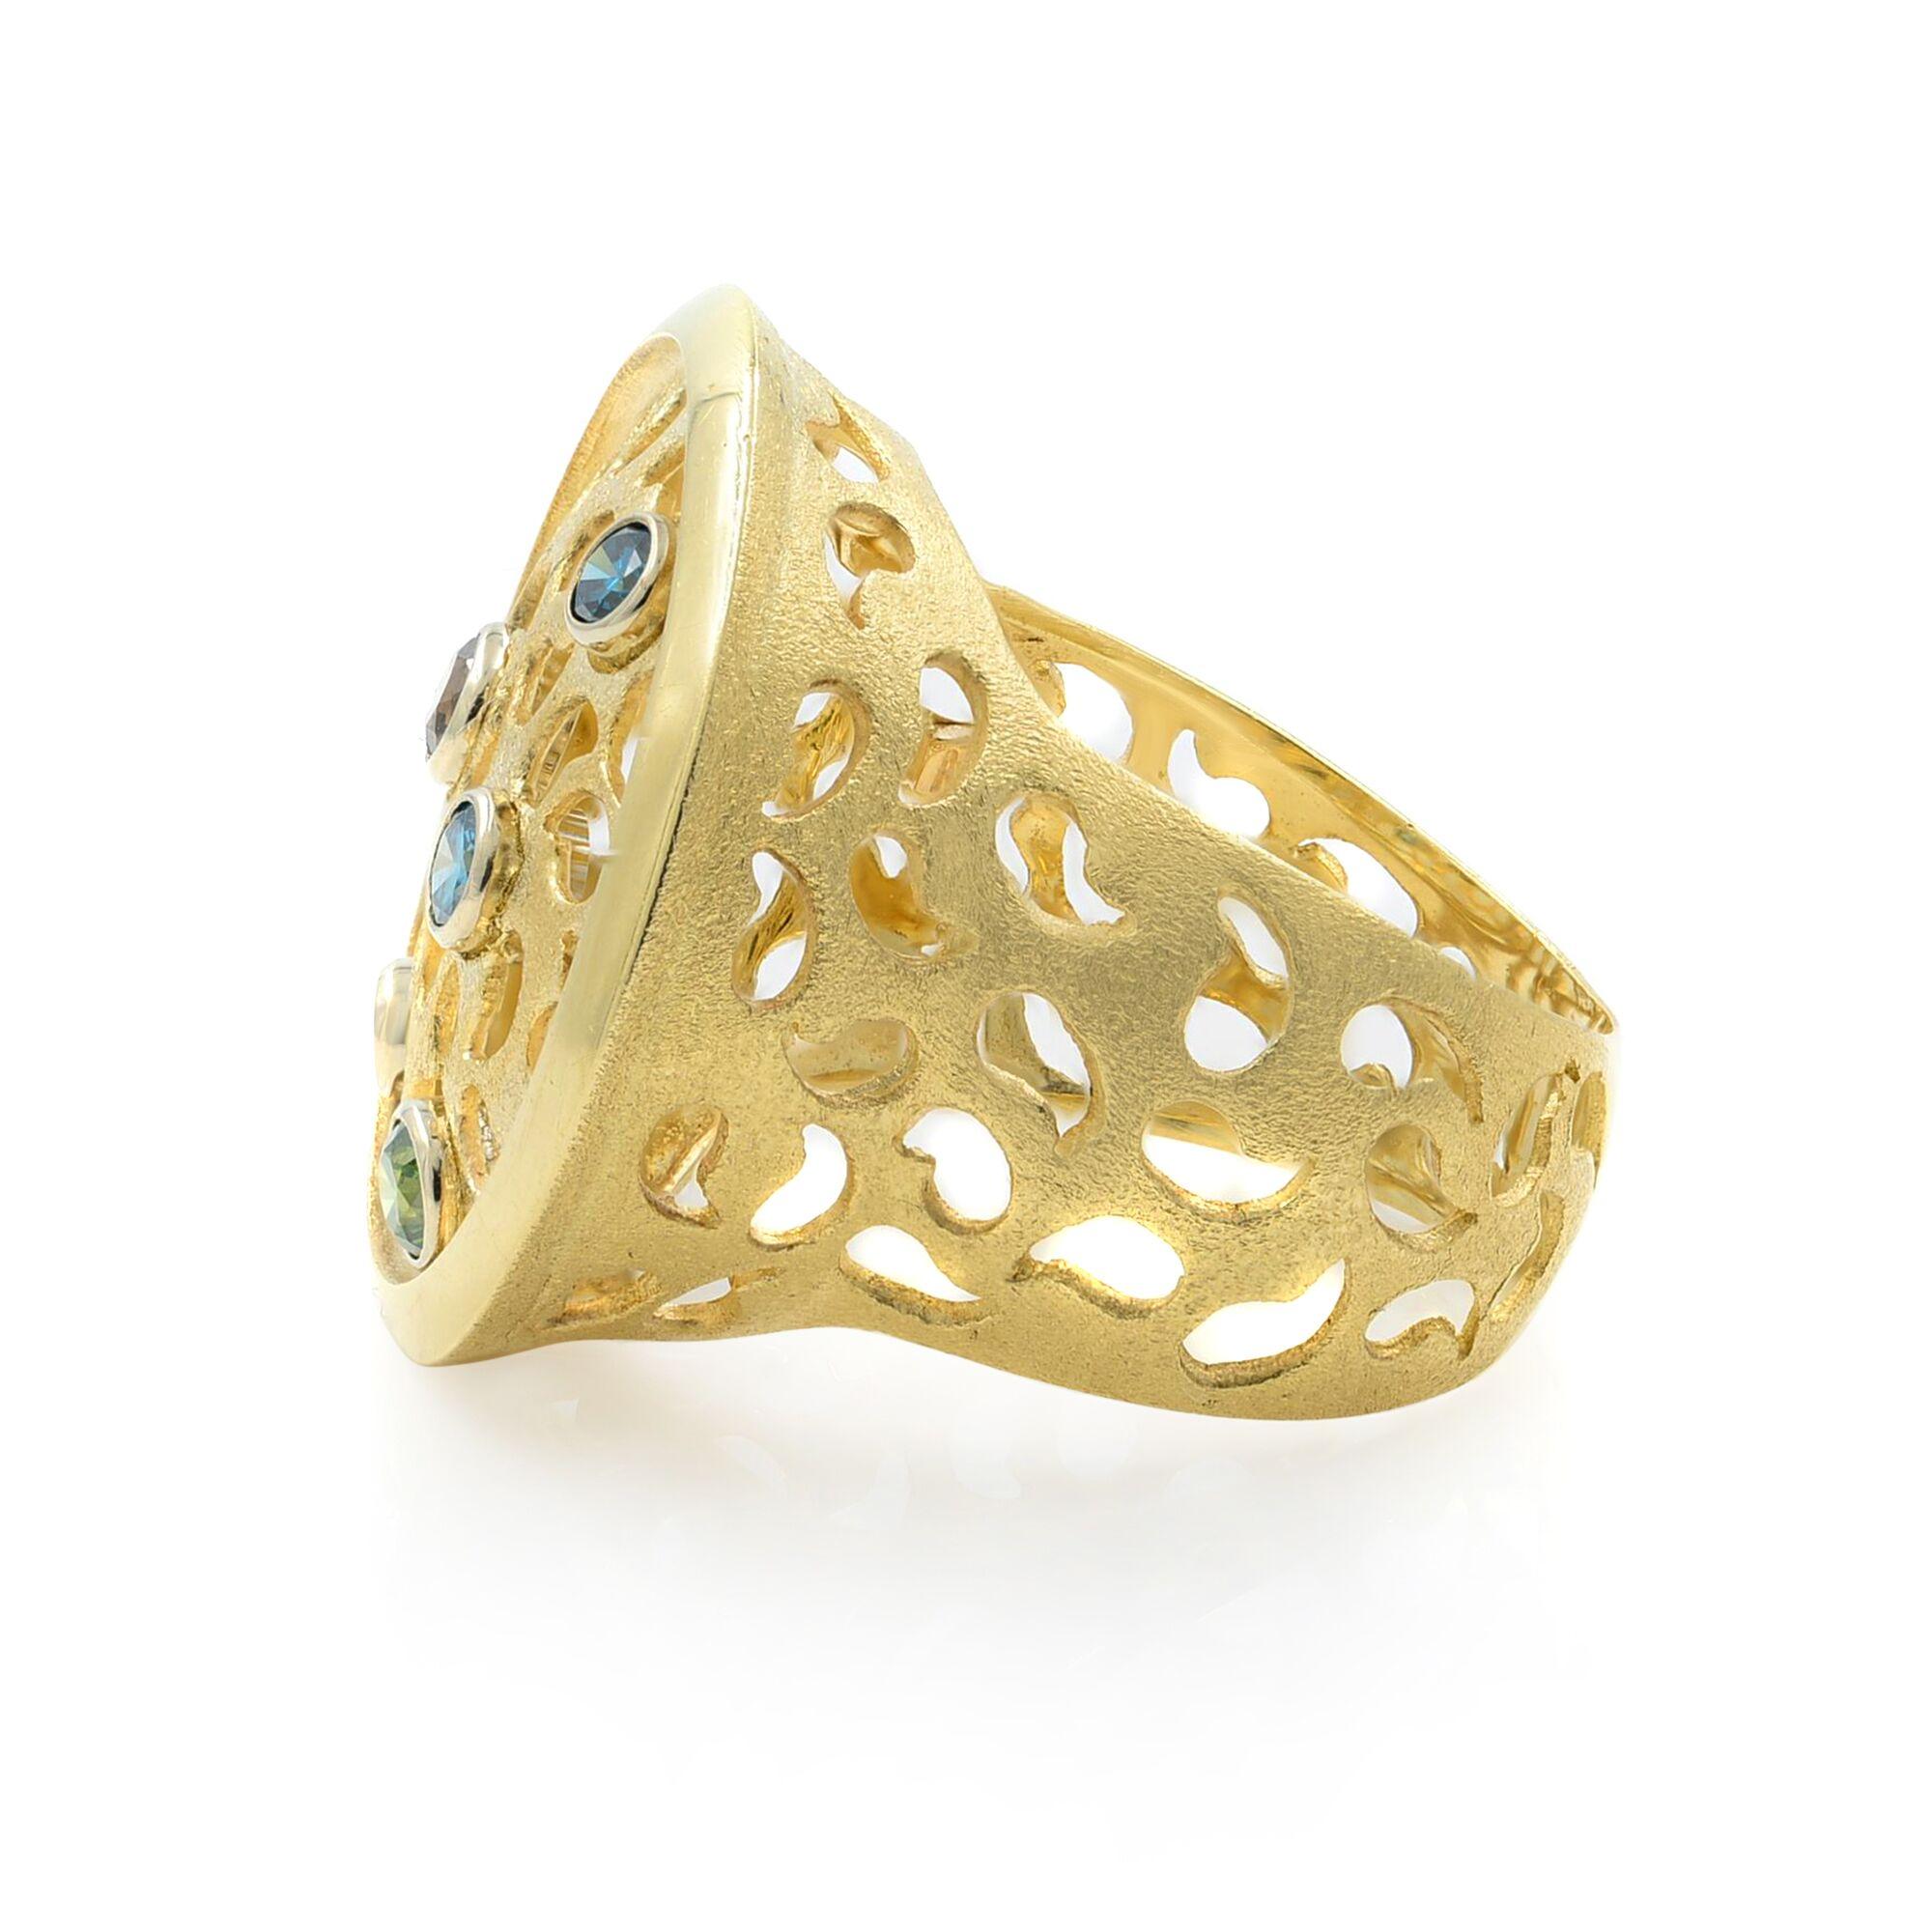 Round Cut Rachel Koen 5 Colored Diamond Cocktail Ring 14K Yellow Gold 0.50Cttw For Sale